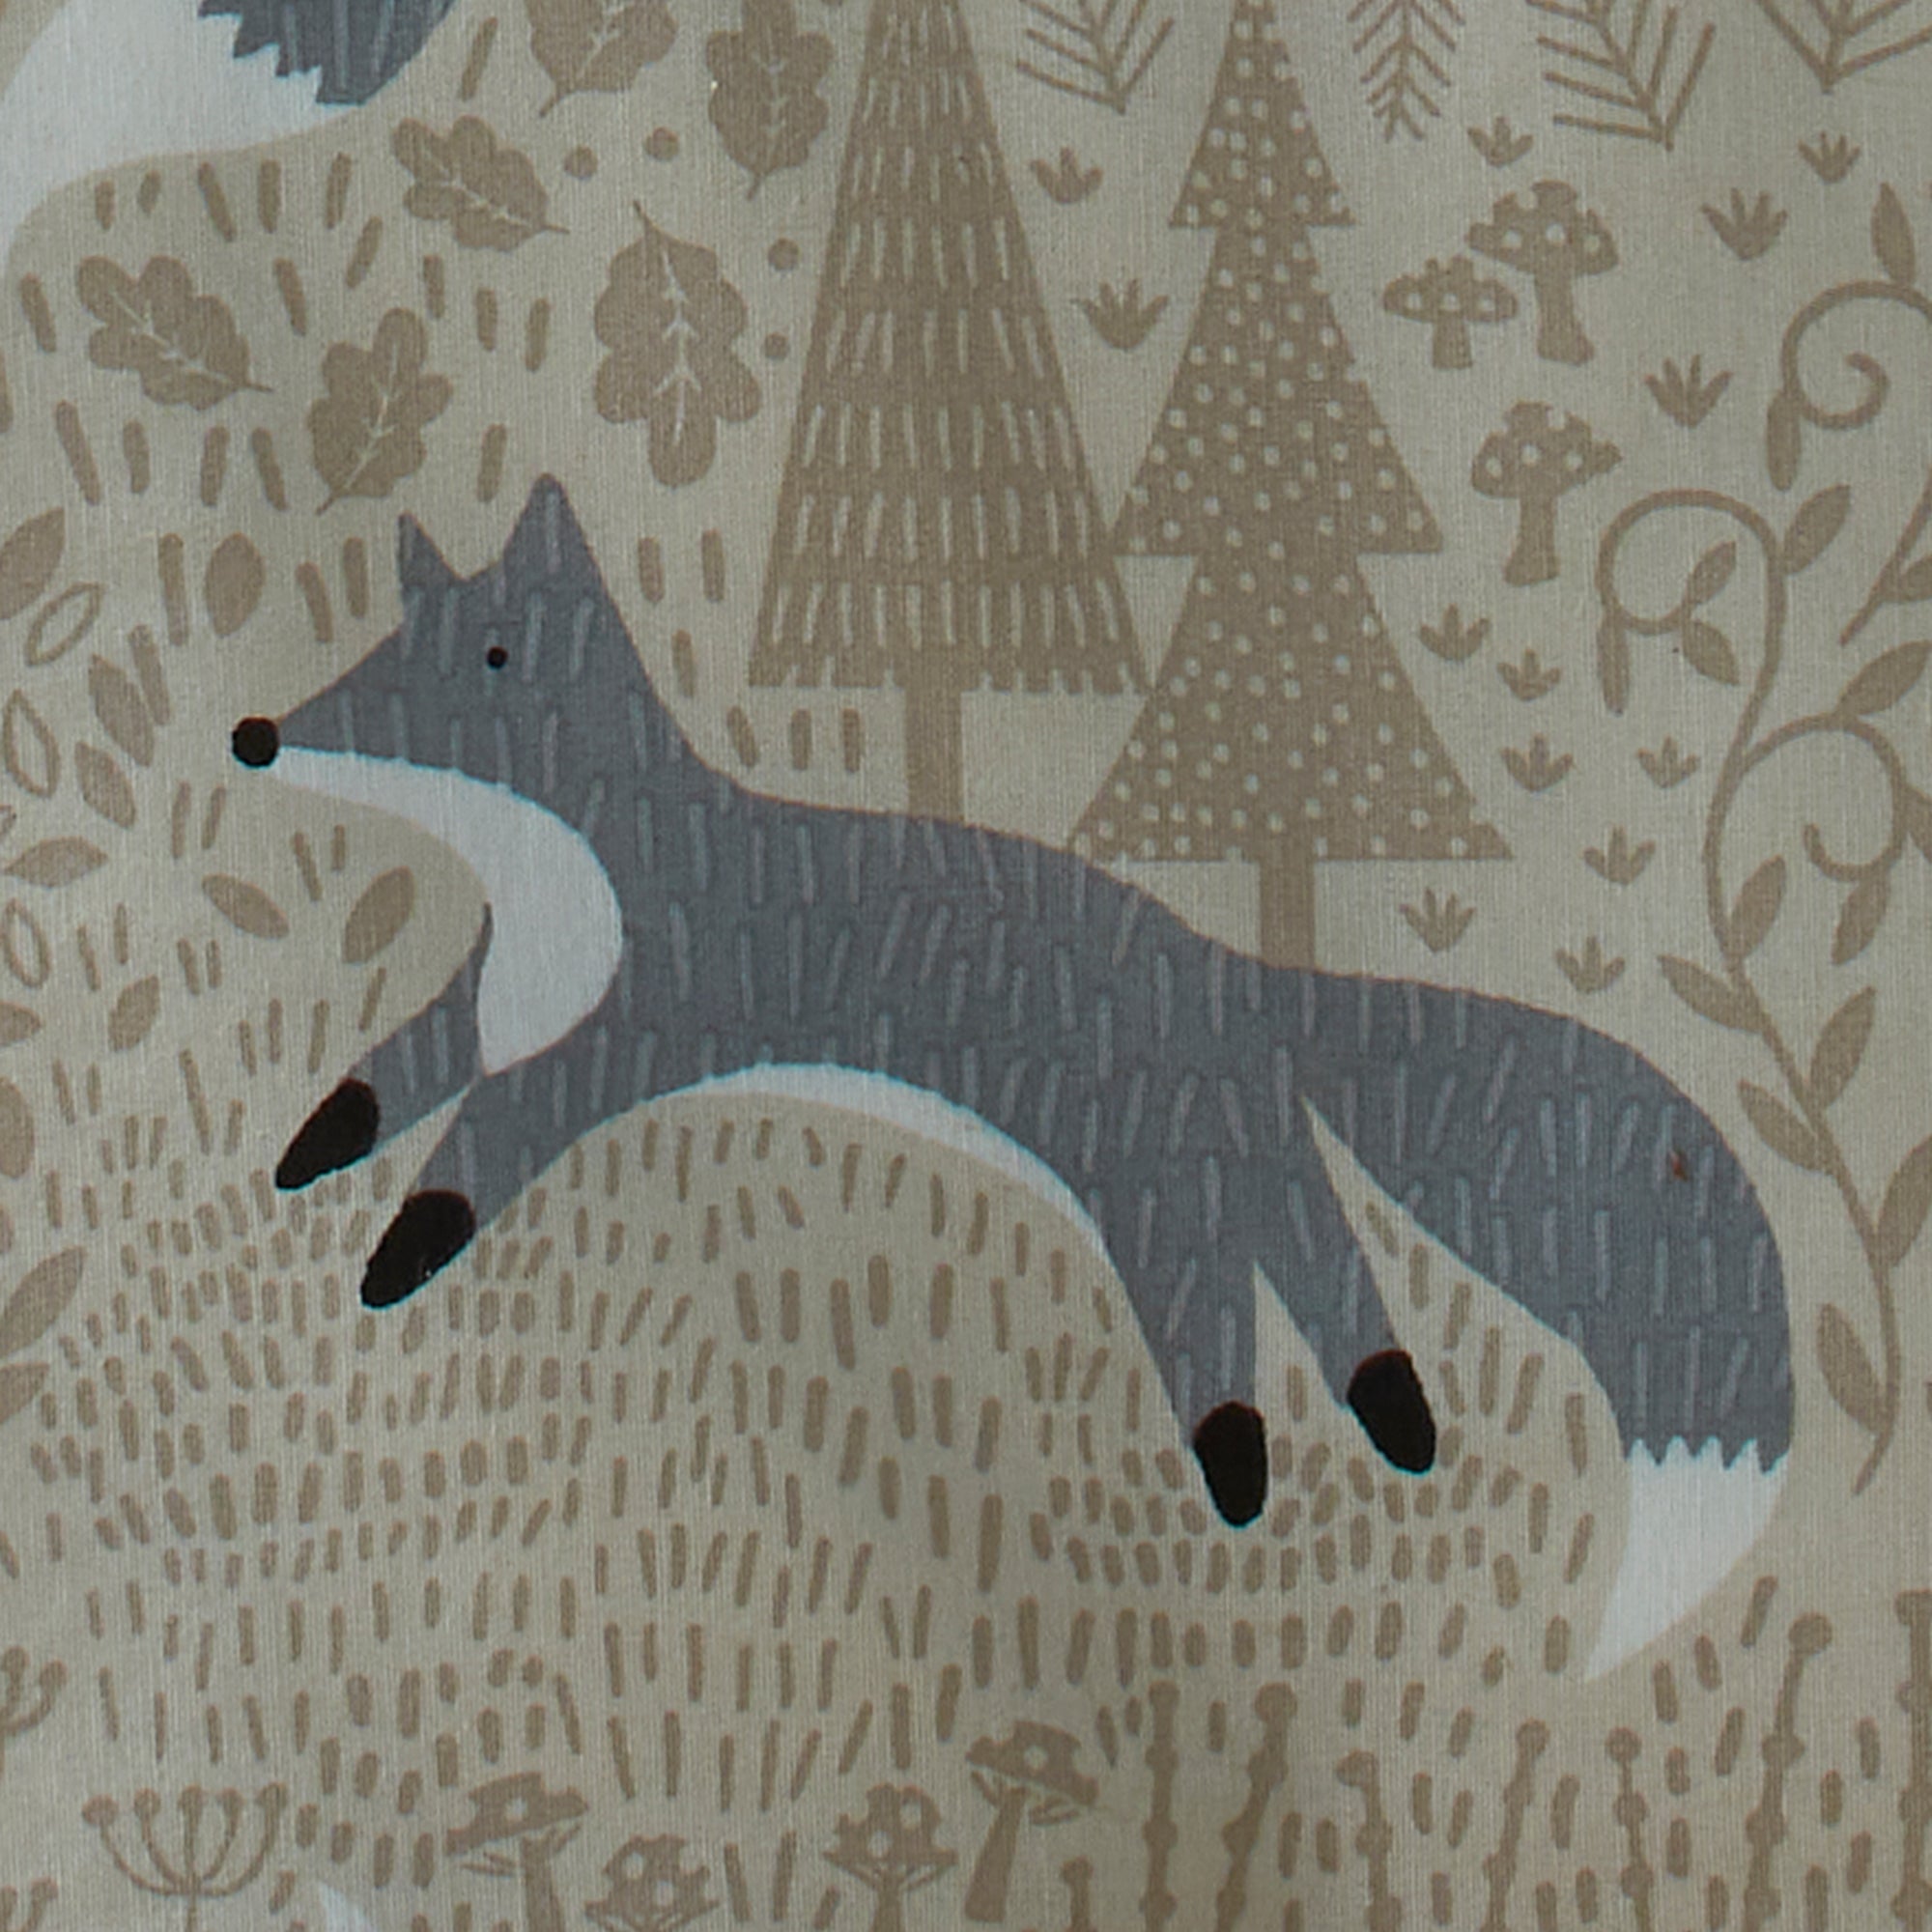 Duvet Cover Set Foraging Fox by Fusion Snug in Natural